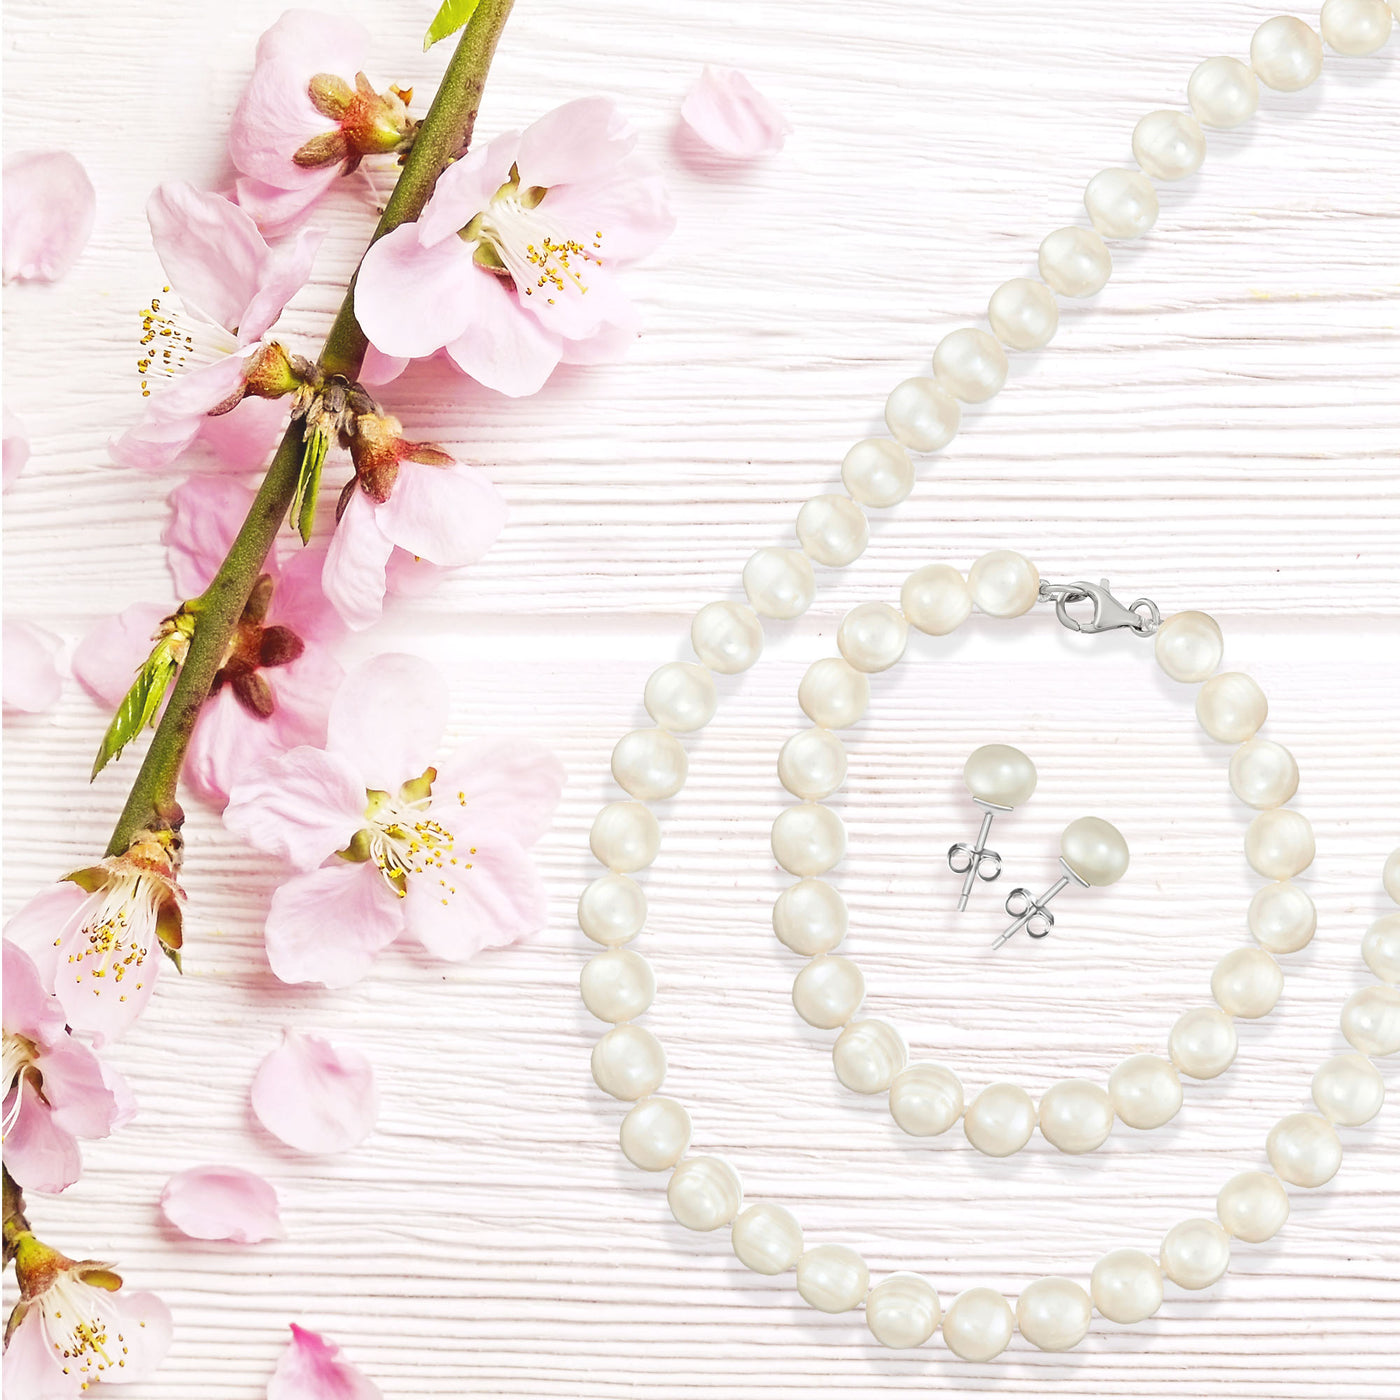 Three Piece Set: White Fresh Water Potato Pearl NecklaceWith Matching Bracelet And Earrings